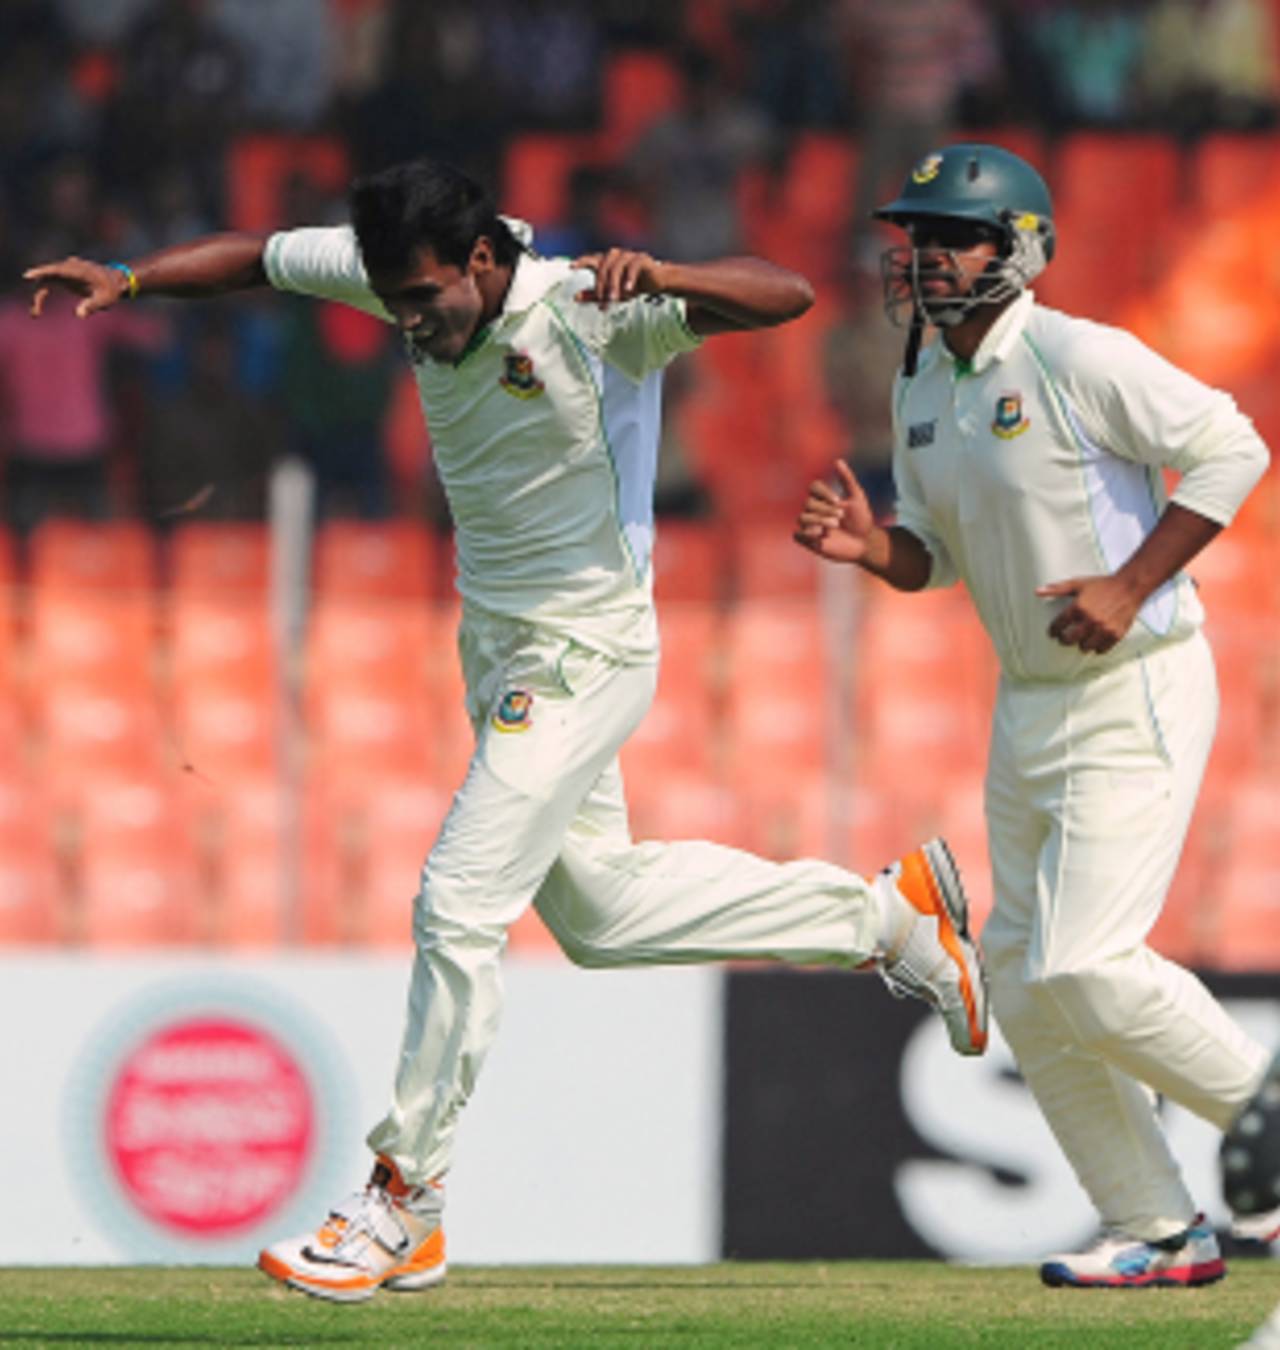 Rubel Hossain is happy after claiming the wicket of Kieran Powell, Bangladesh v West Indies, 2nd Test, Khulna, 2nd day, November 22, 2012